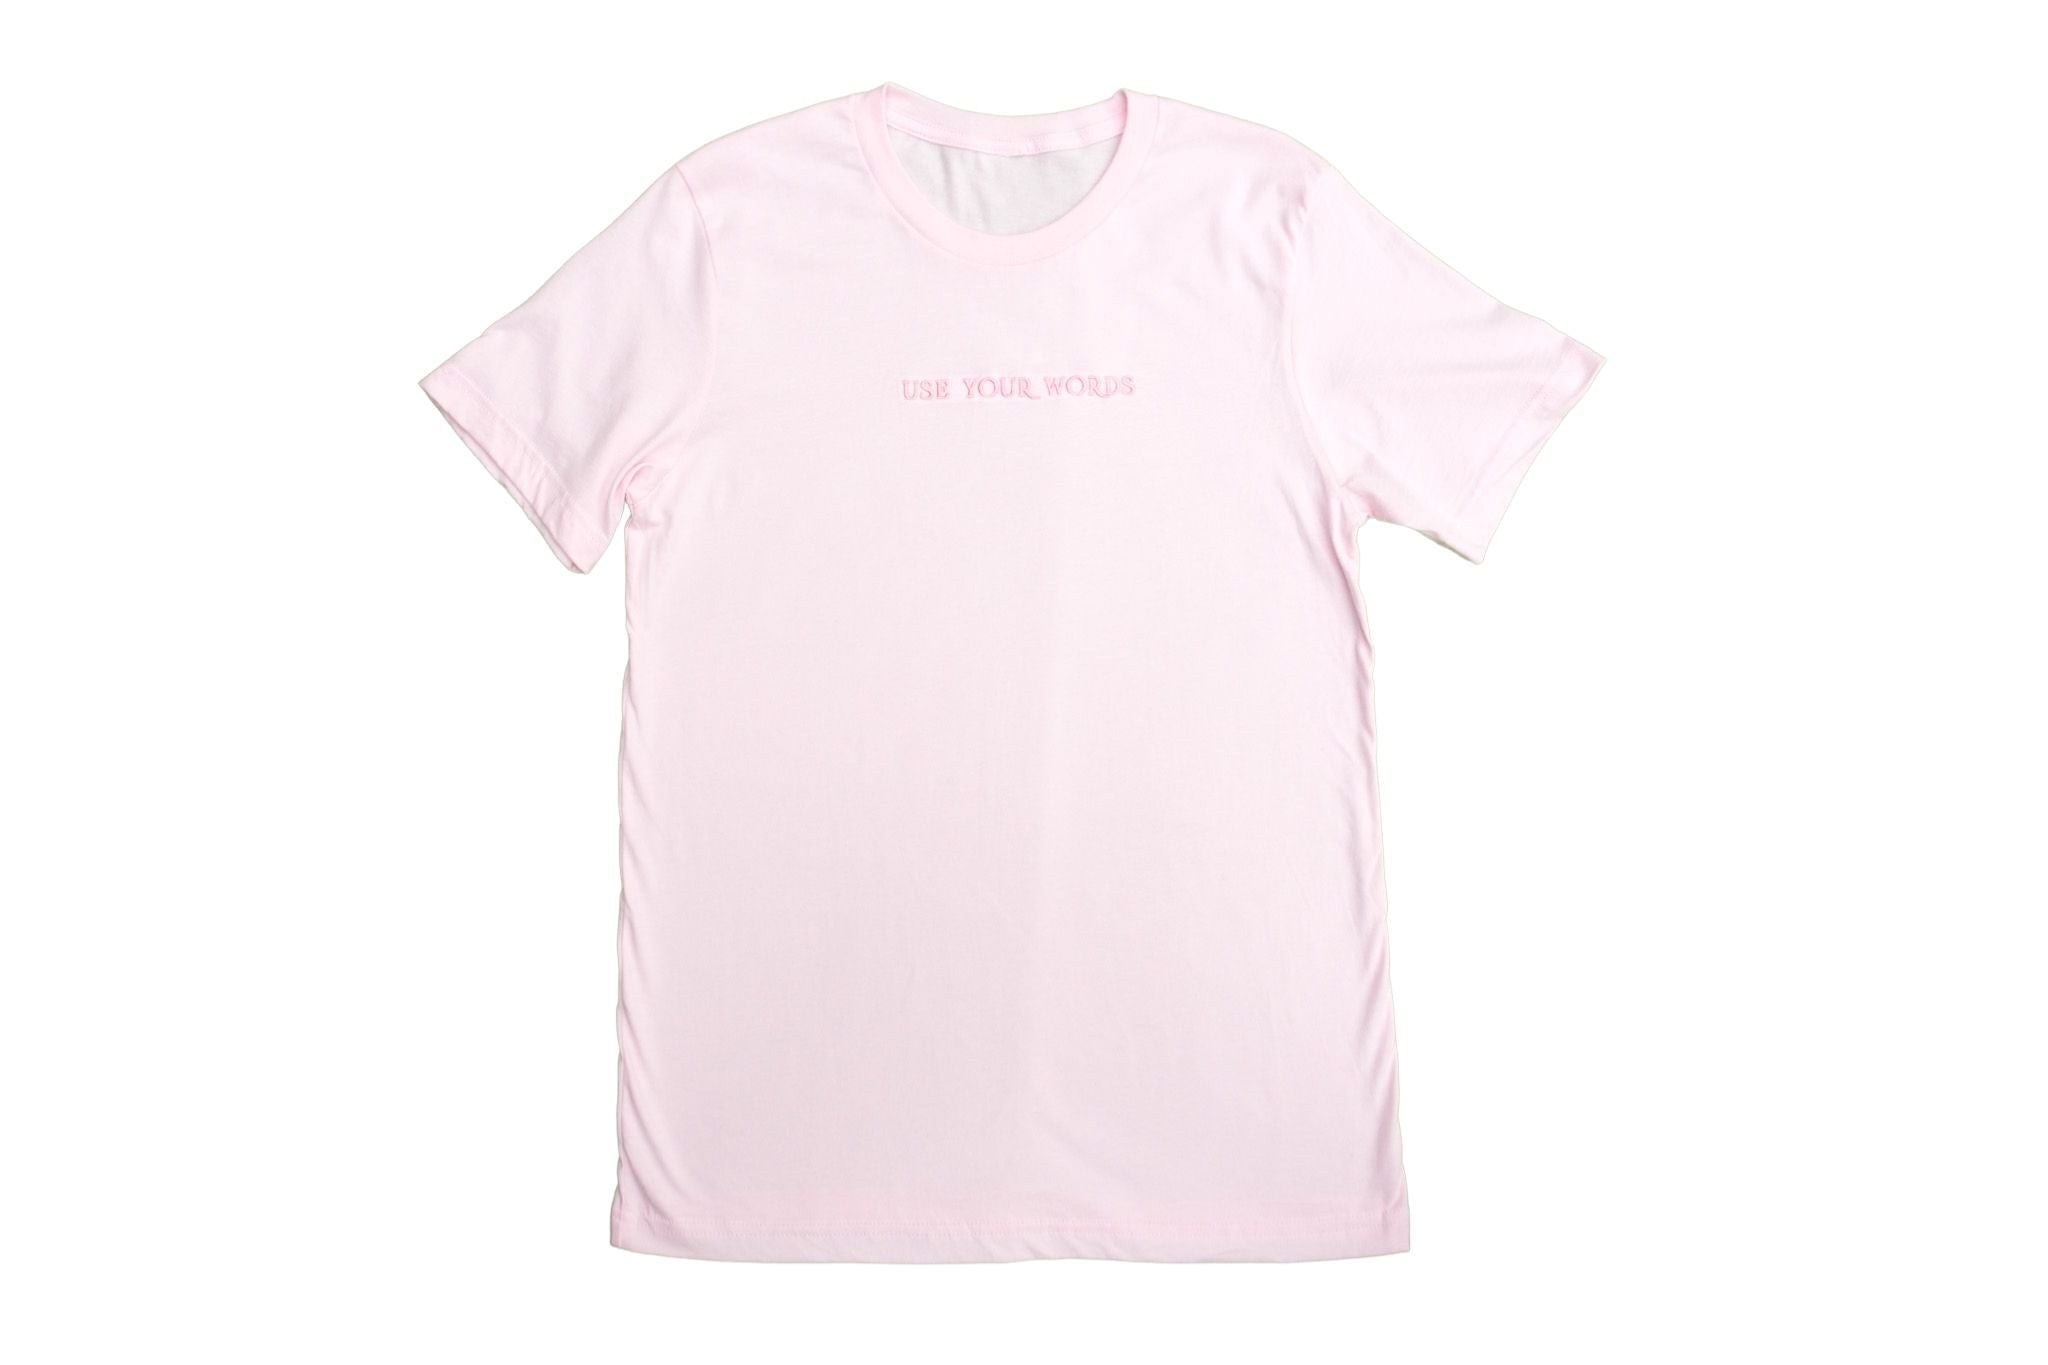 Use Your Words Tee - PINK